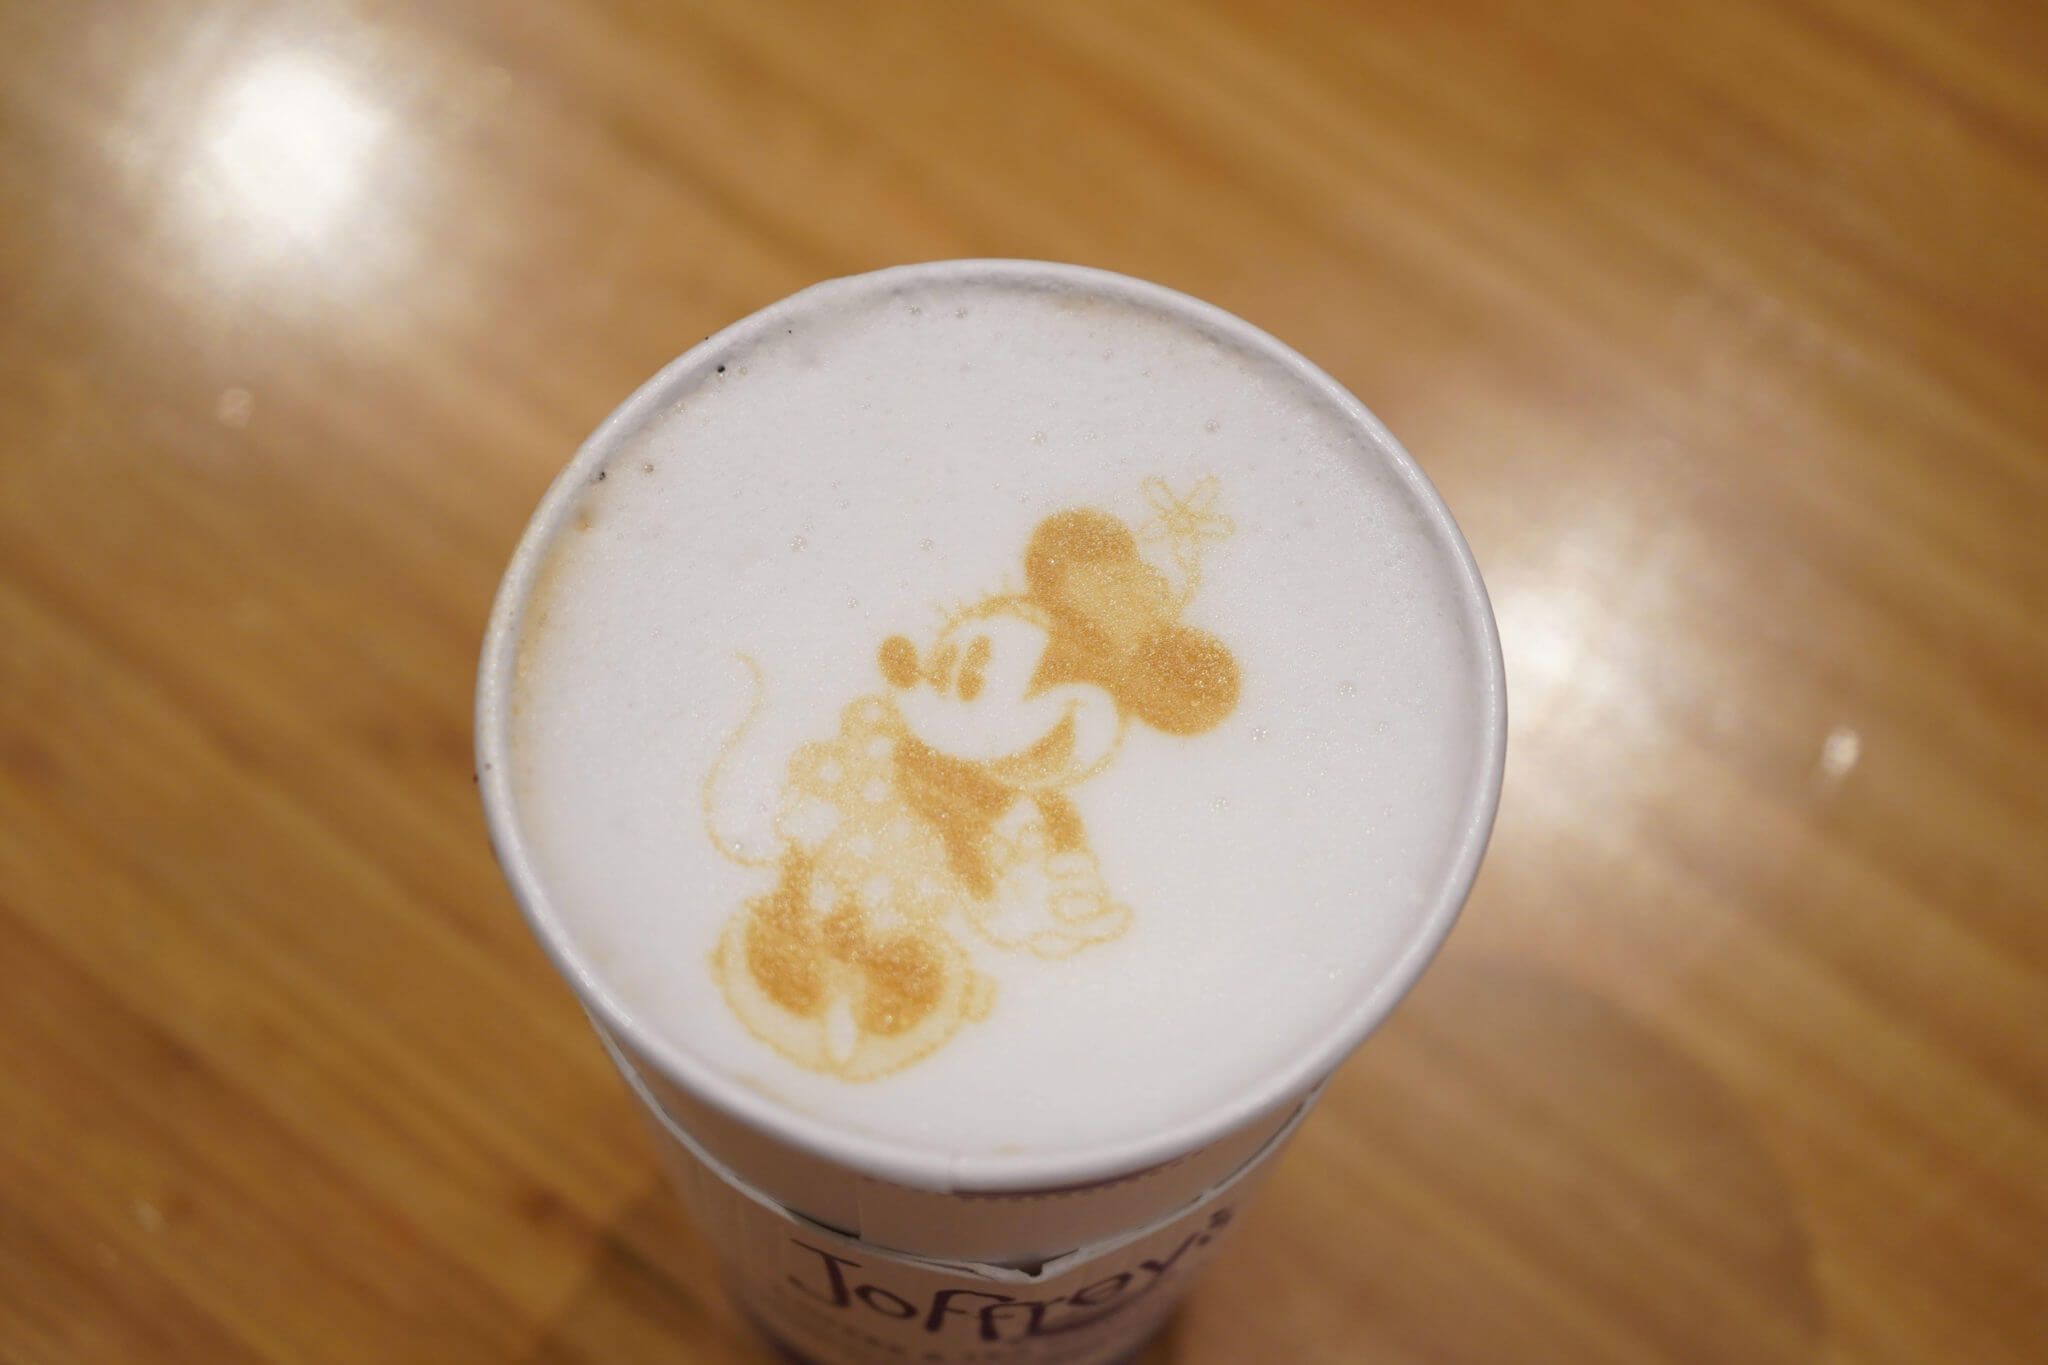 Minnie Mouse Latte Art from Joffrey's Tea Traders Cafe in Disney Springs at Disney World